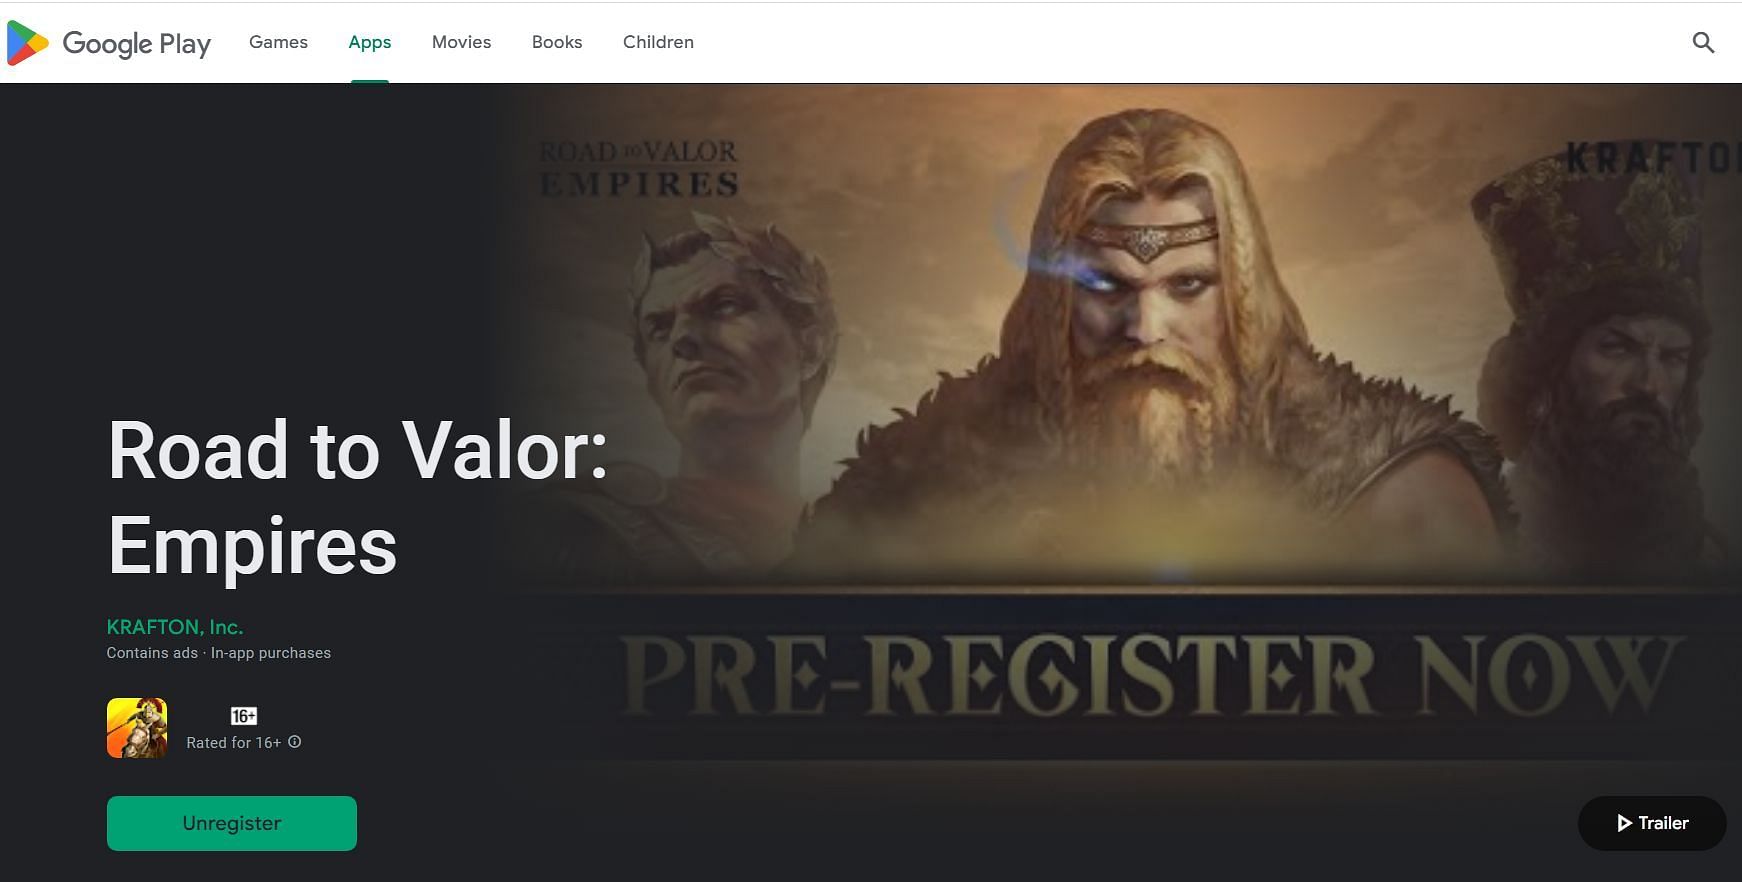 How to pre-register for the game? (Image via Google)